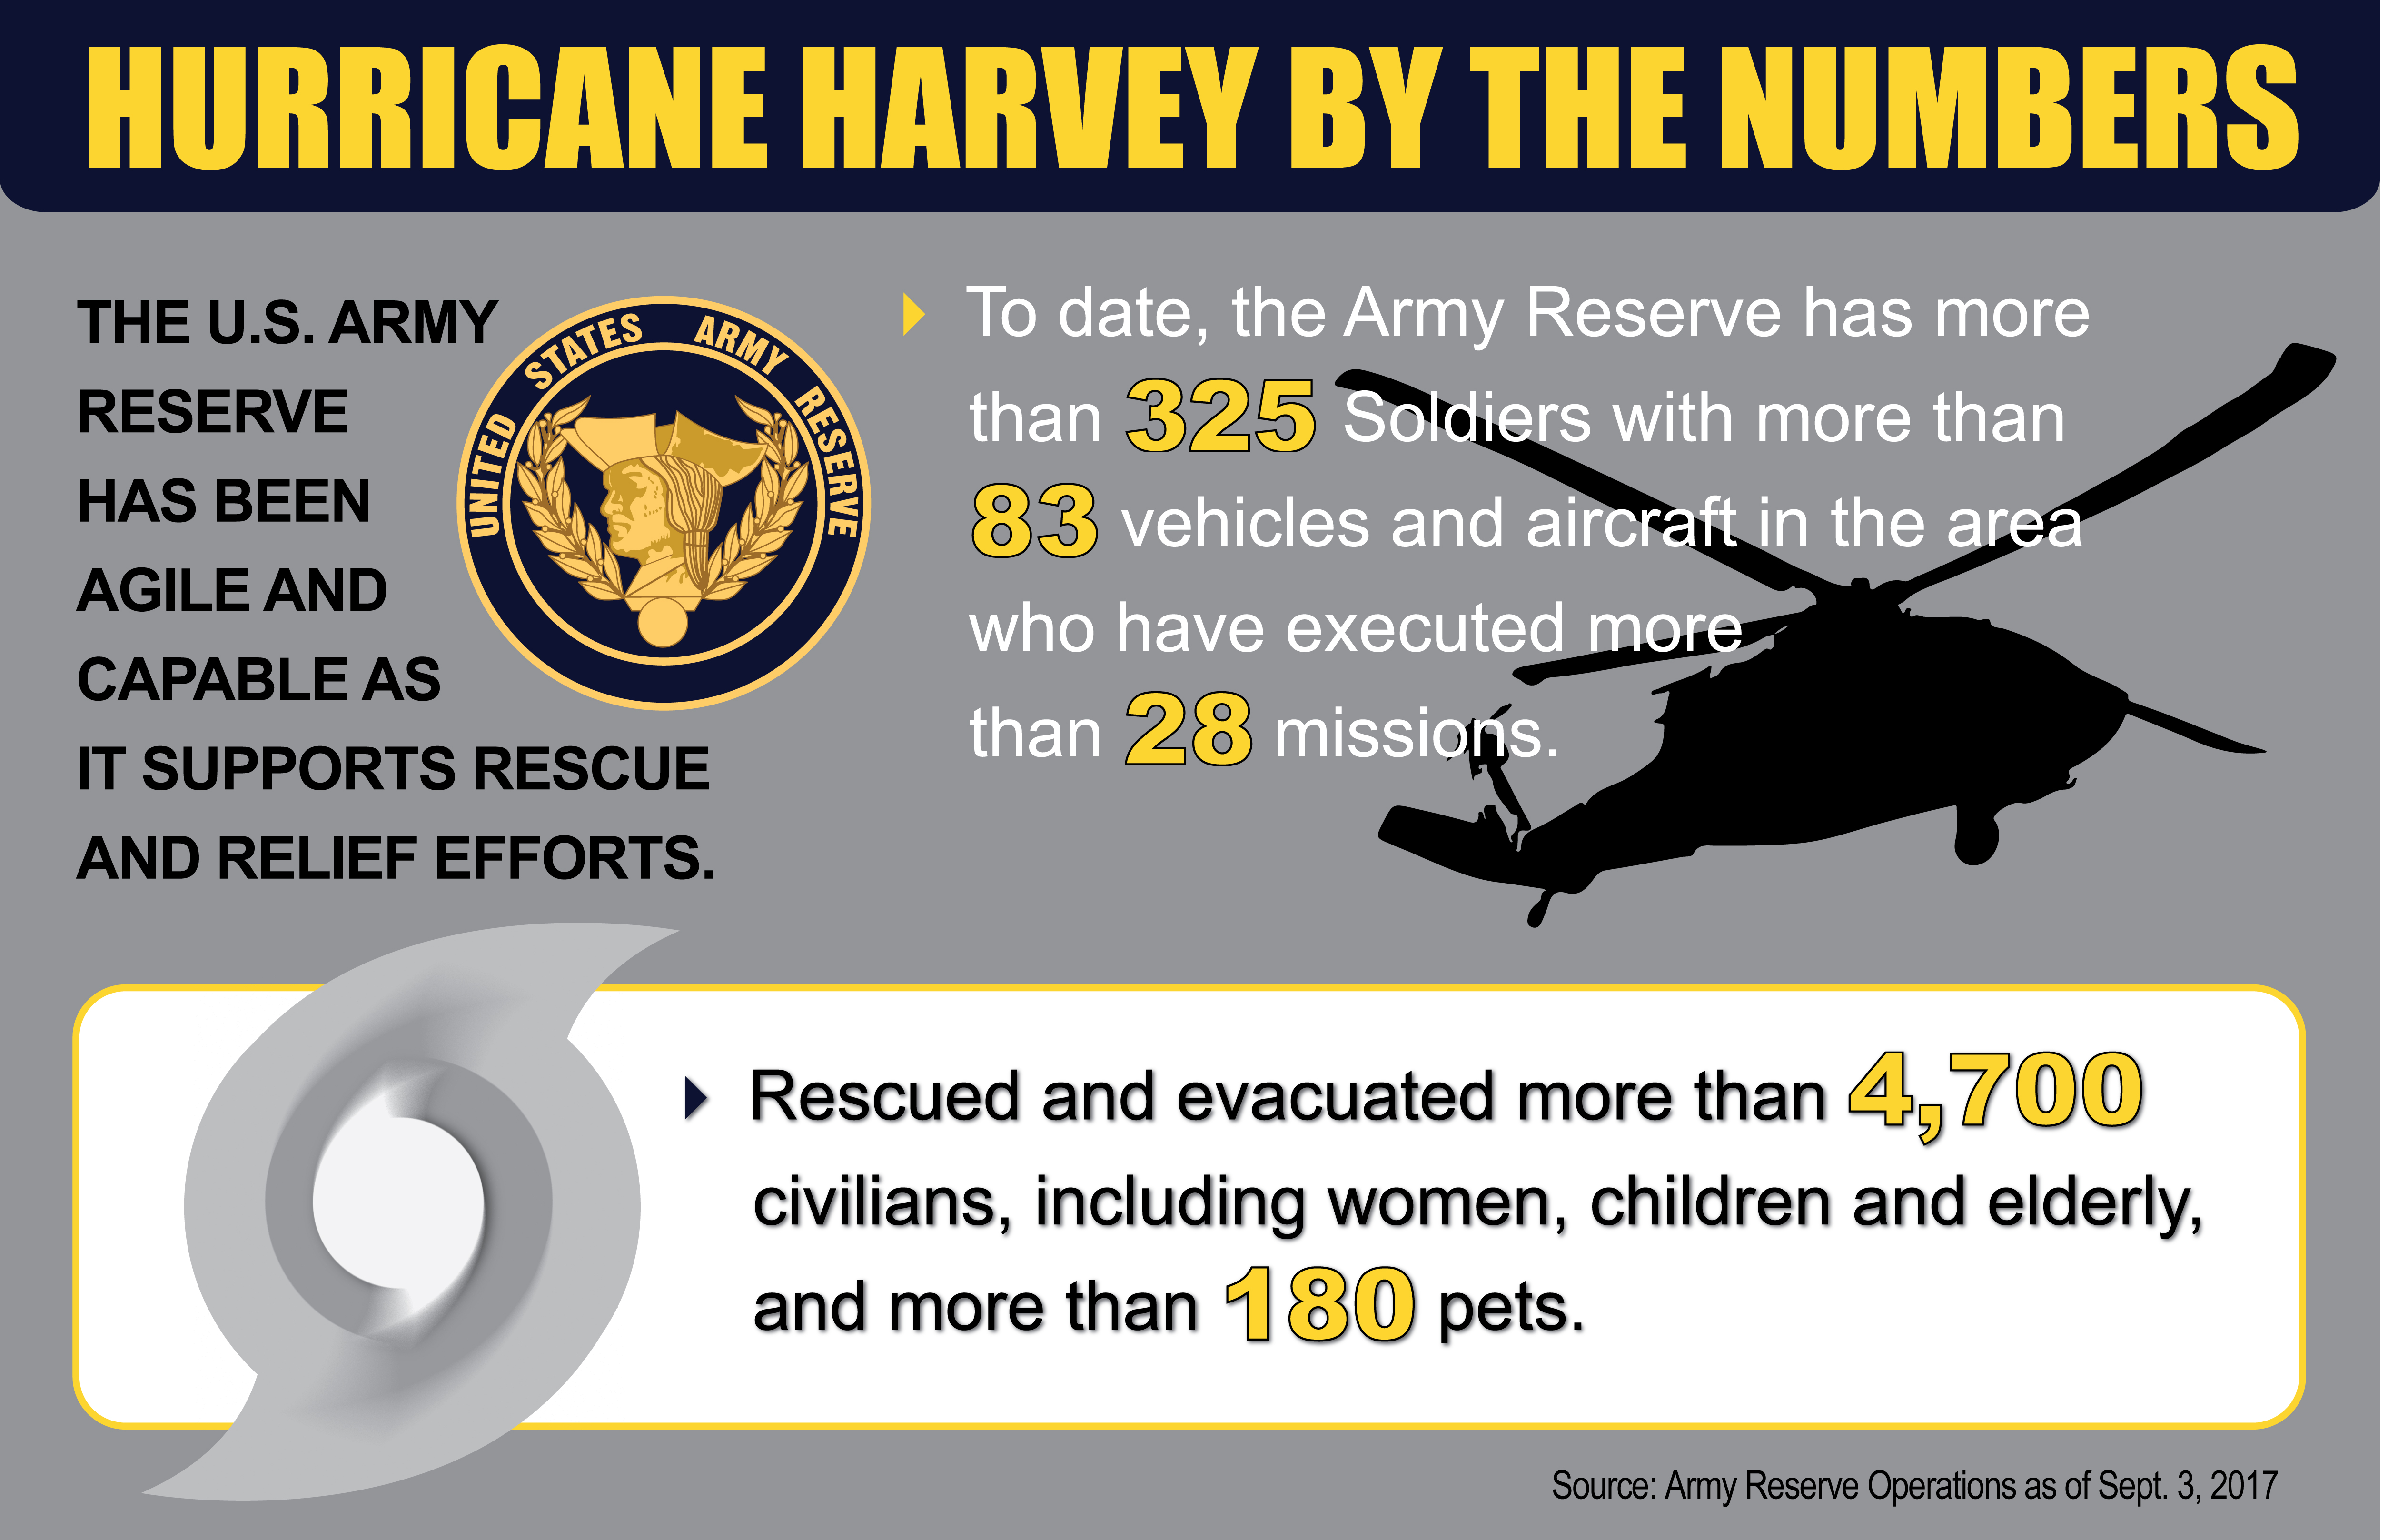 Harvey by the Numbers